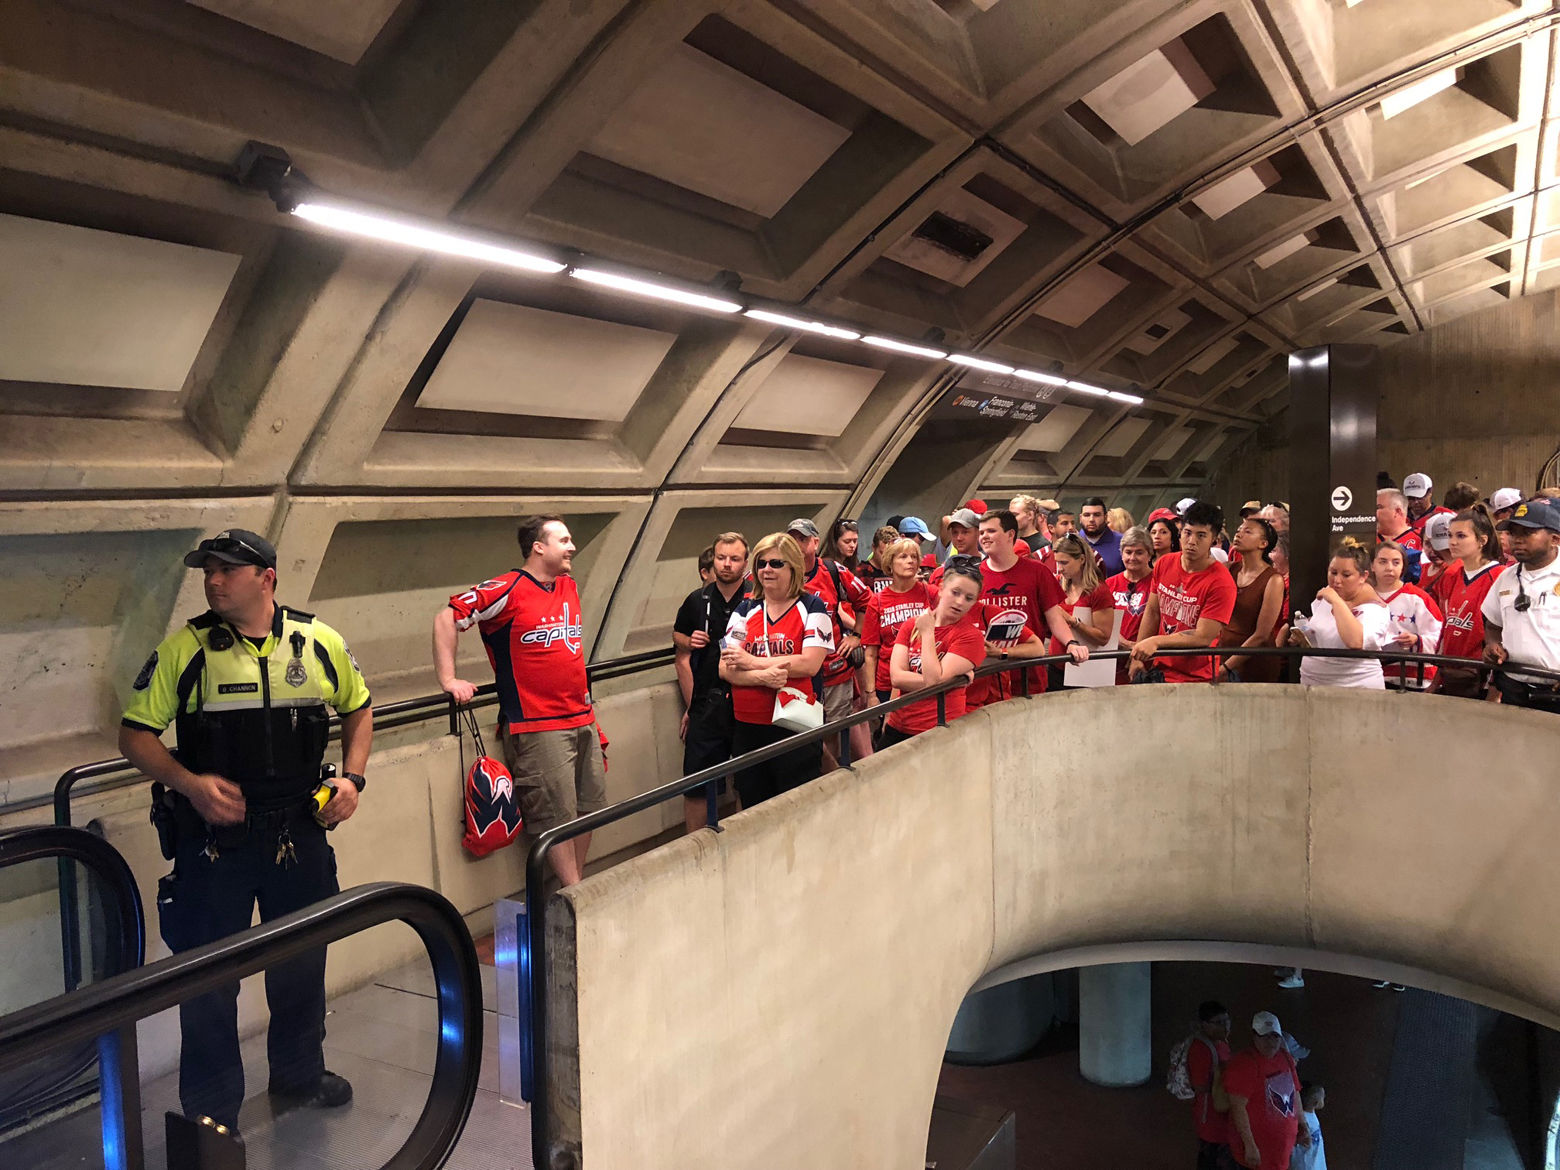 The crowds required metro to limit the number of people on platforms at Smithsonian, but it was manageable a little after 1 p.m. (WTOP/Dave Dildine)